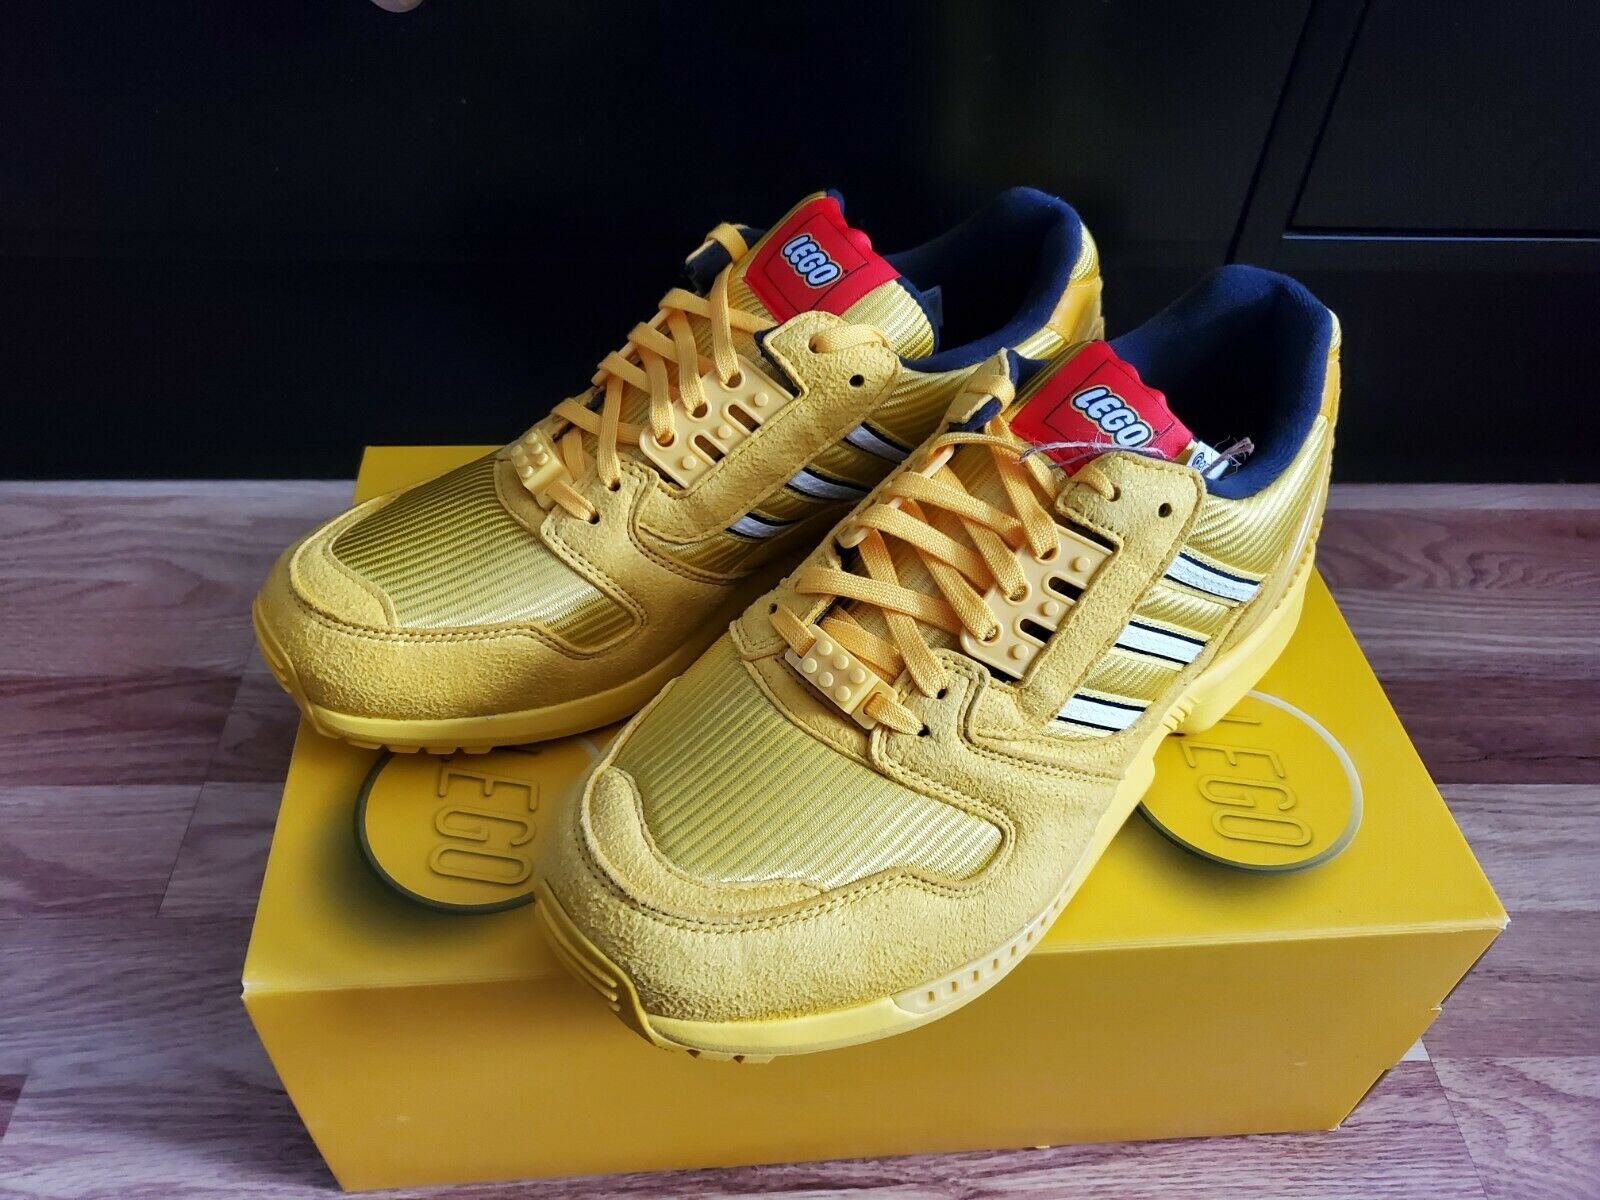 Adidas Originals x LEGO ZX 8000 Yellow Limited Edition Men Size 9.5 Shoes FY7081